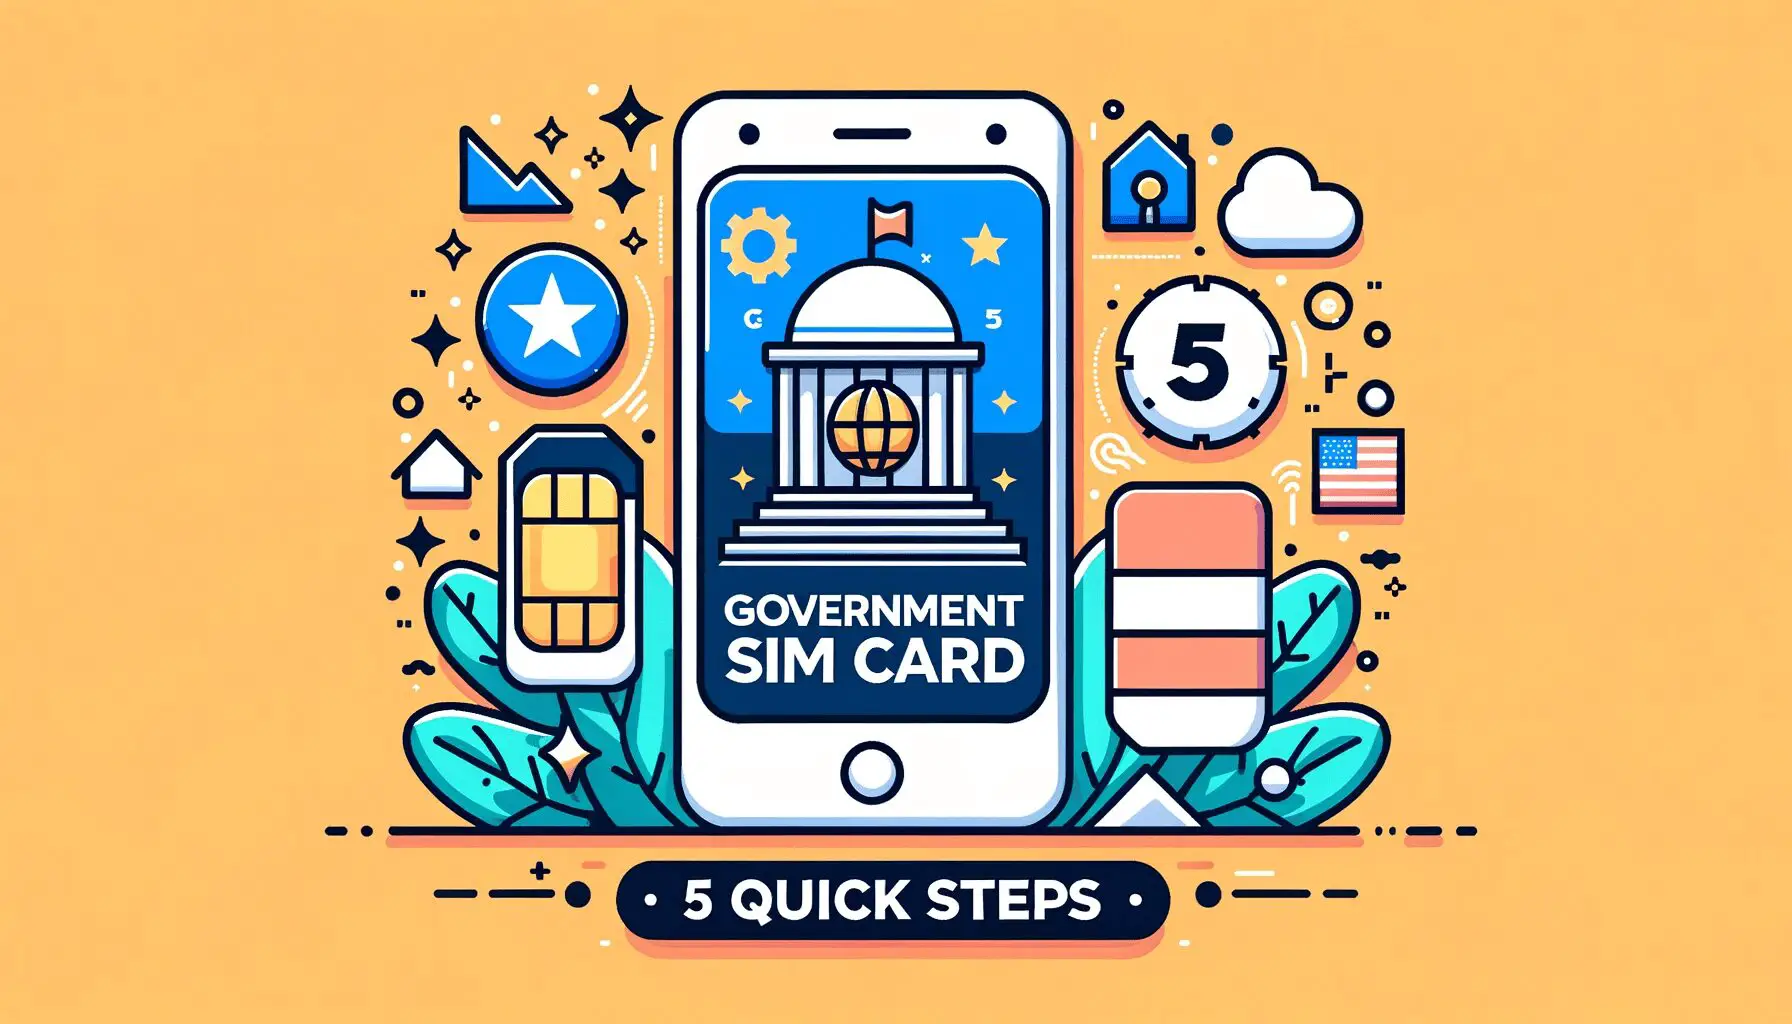 A banner in yellow background with icons and cellphone graphic with text that says "GOVERNMENT SIM CARD 5 QUICK STEPS"